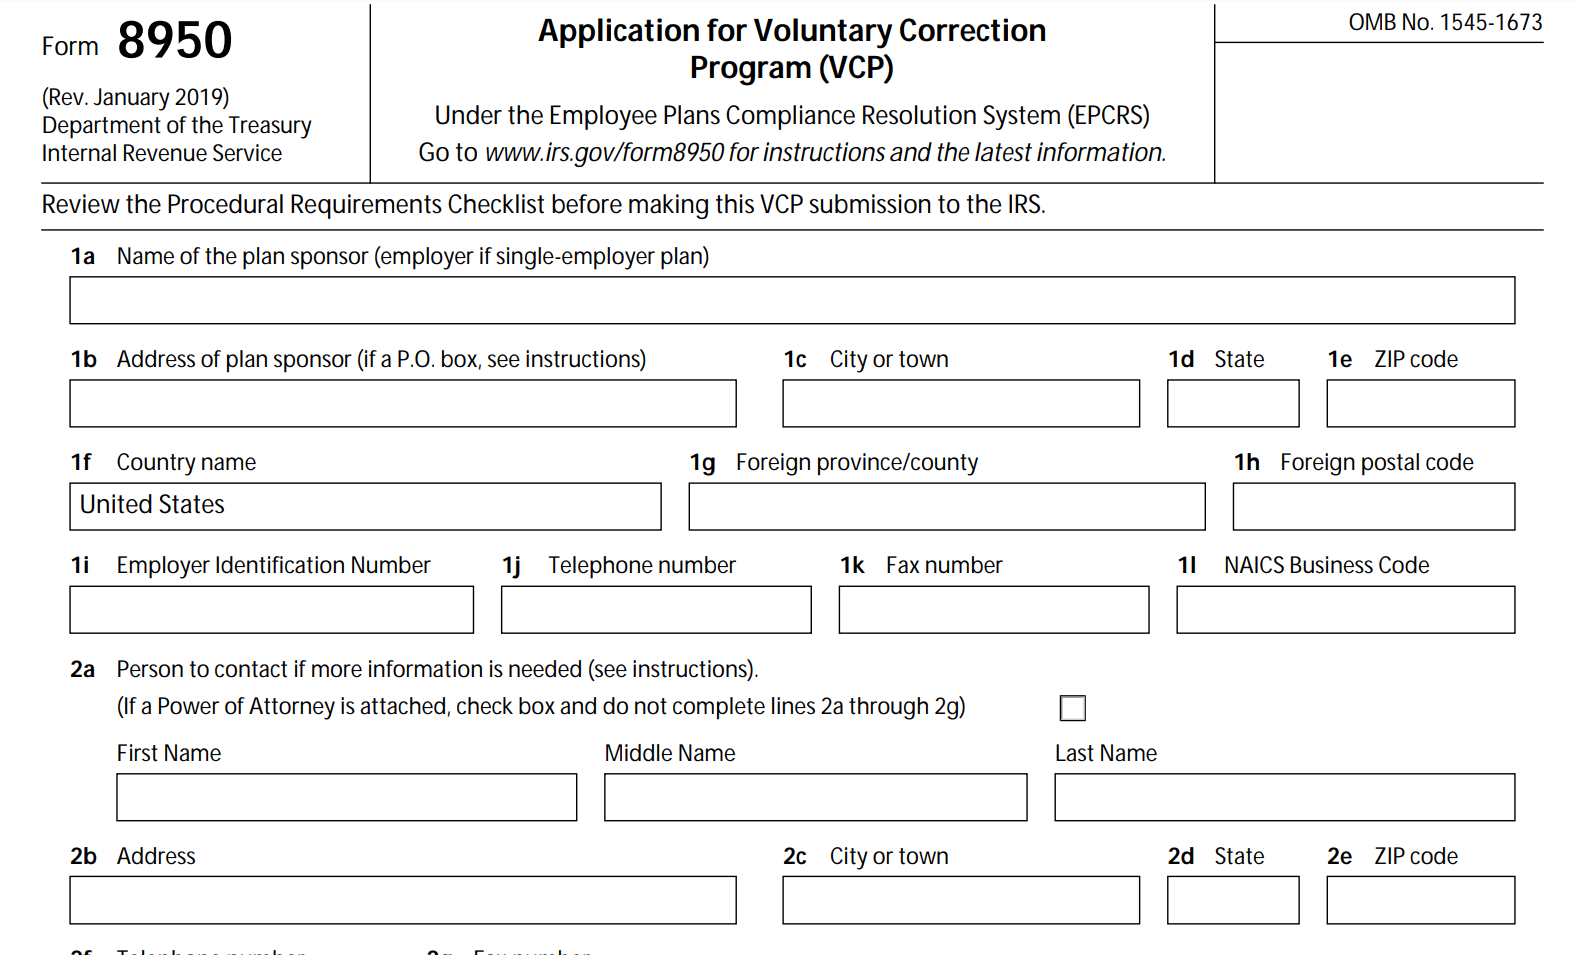 Form 8950: Application for Voluntary Correction Program (VCP)